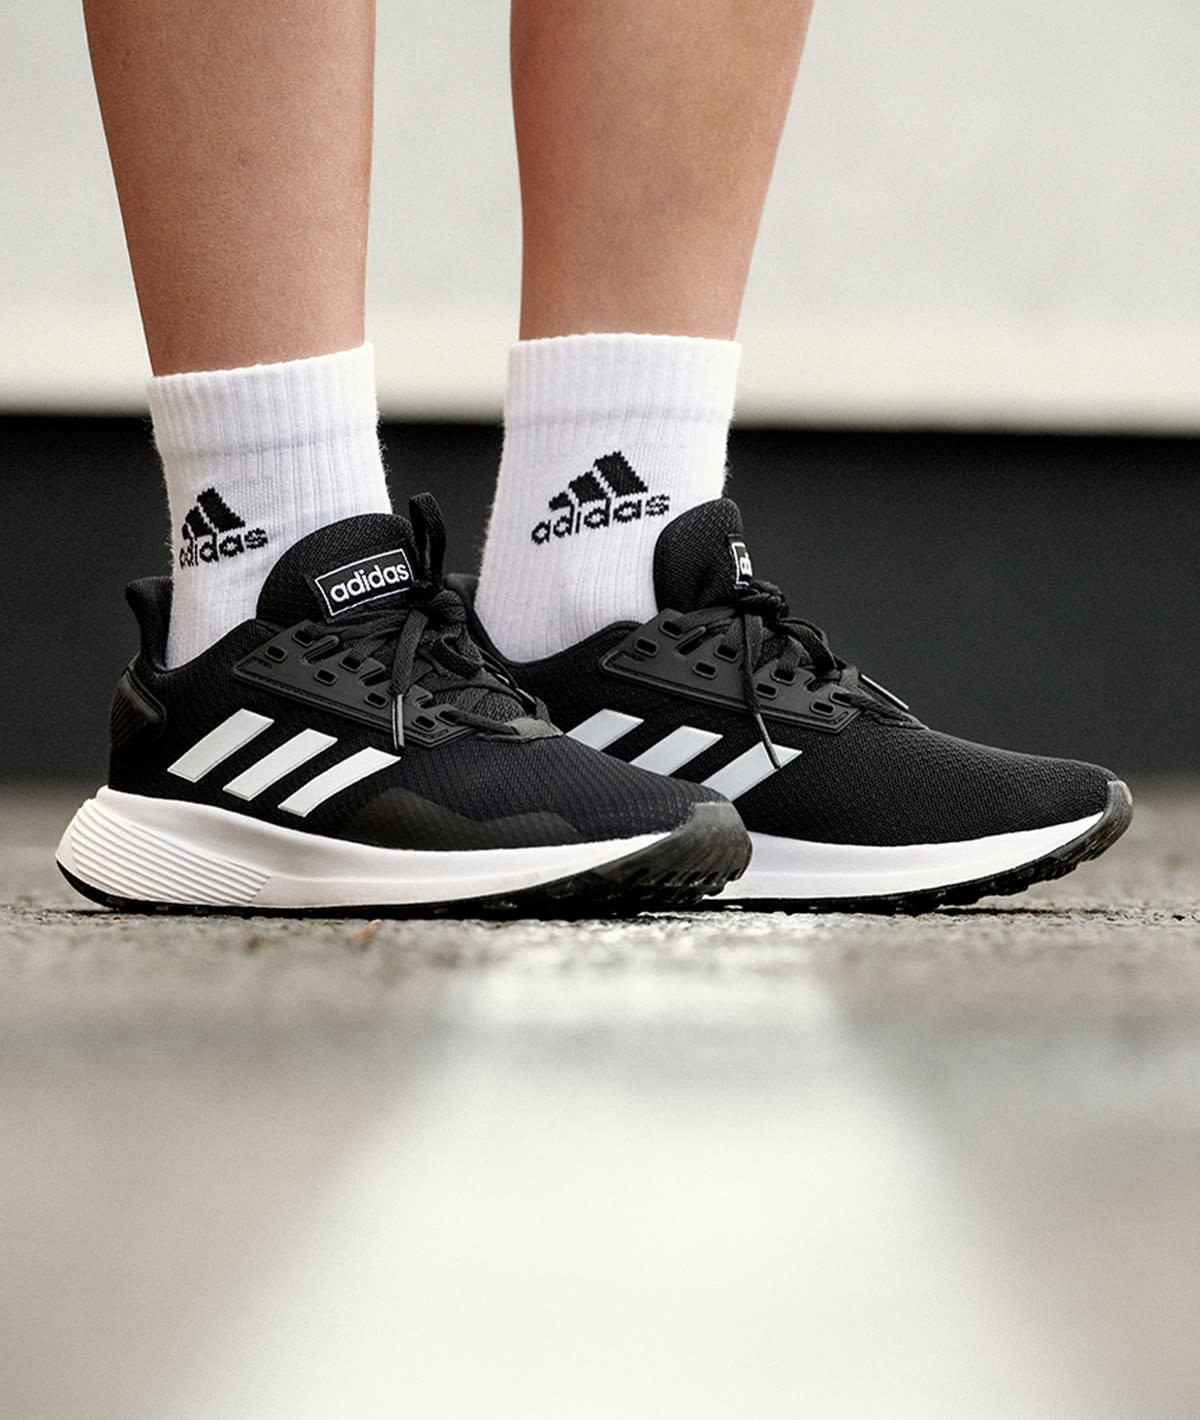 adidas back to school shoes